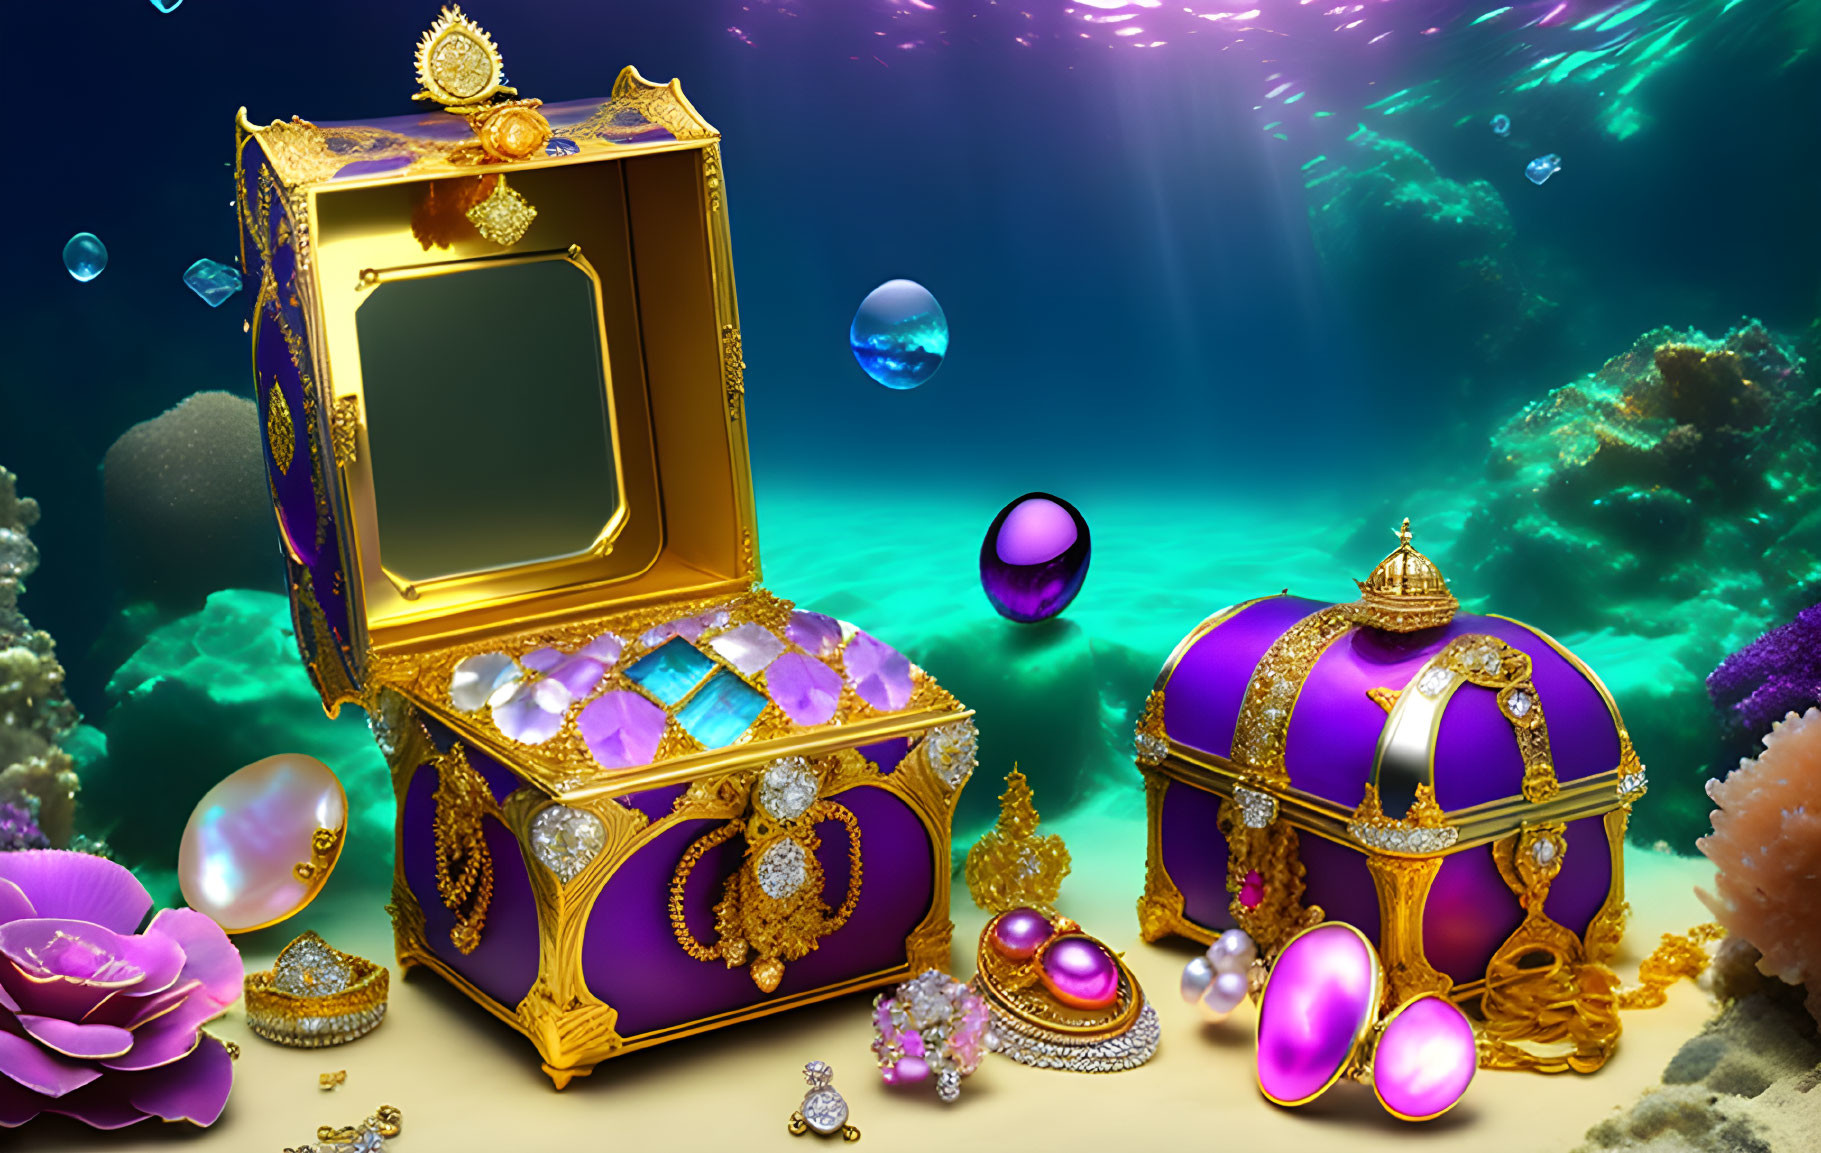 Ornate treasure chest and jewels underwater with bubbles and coral